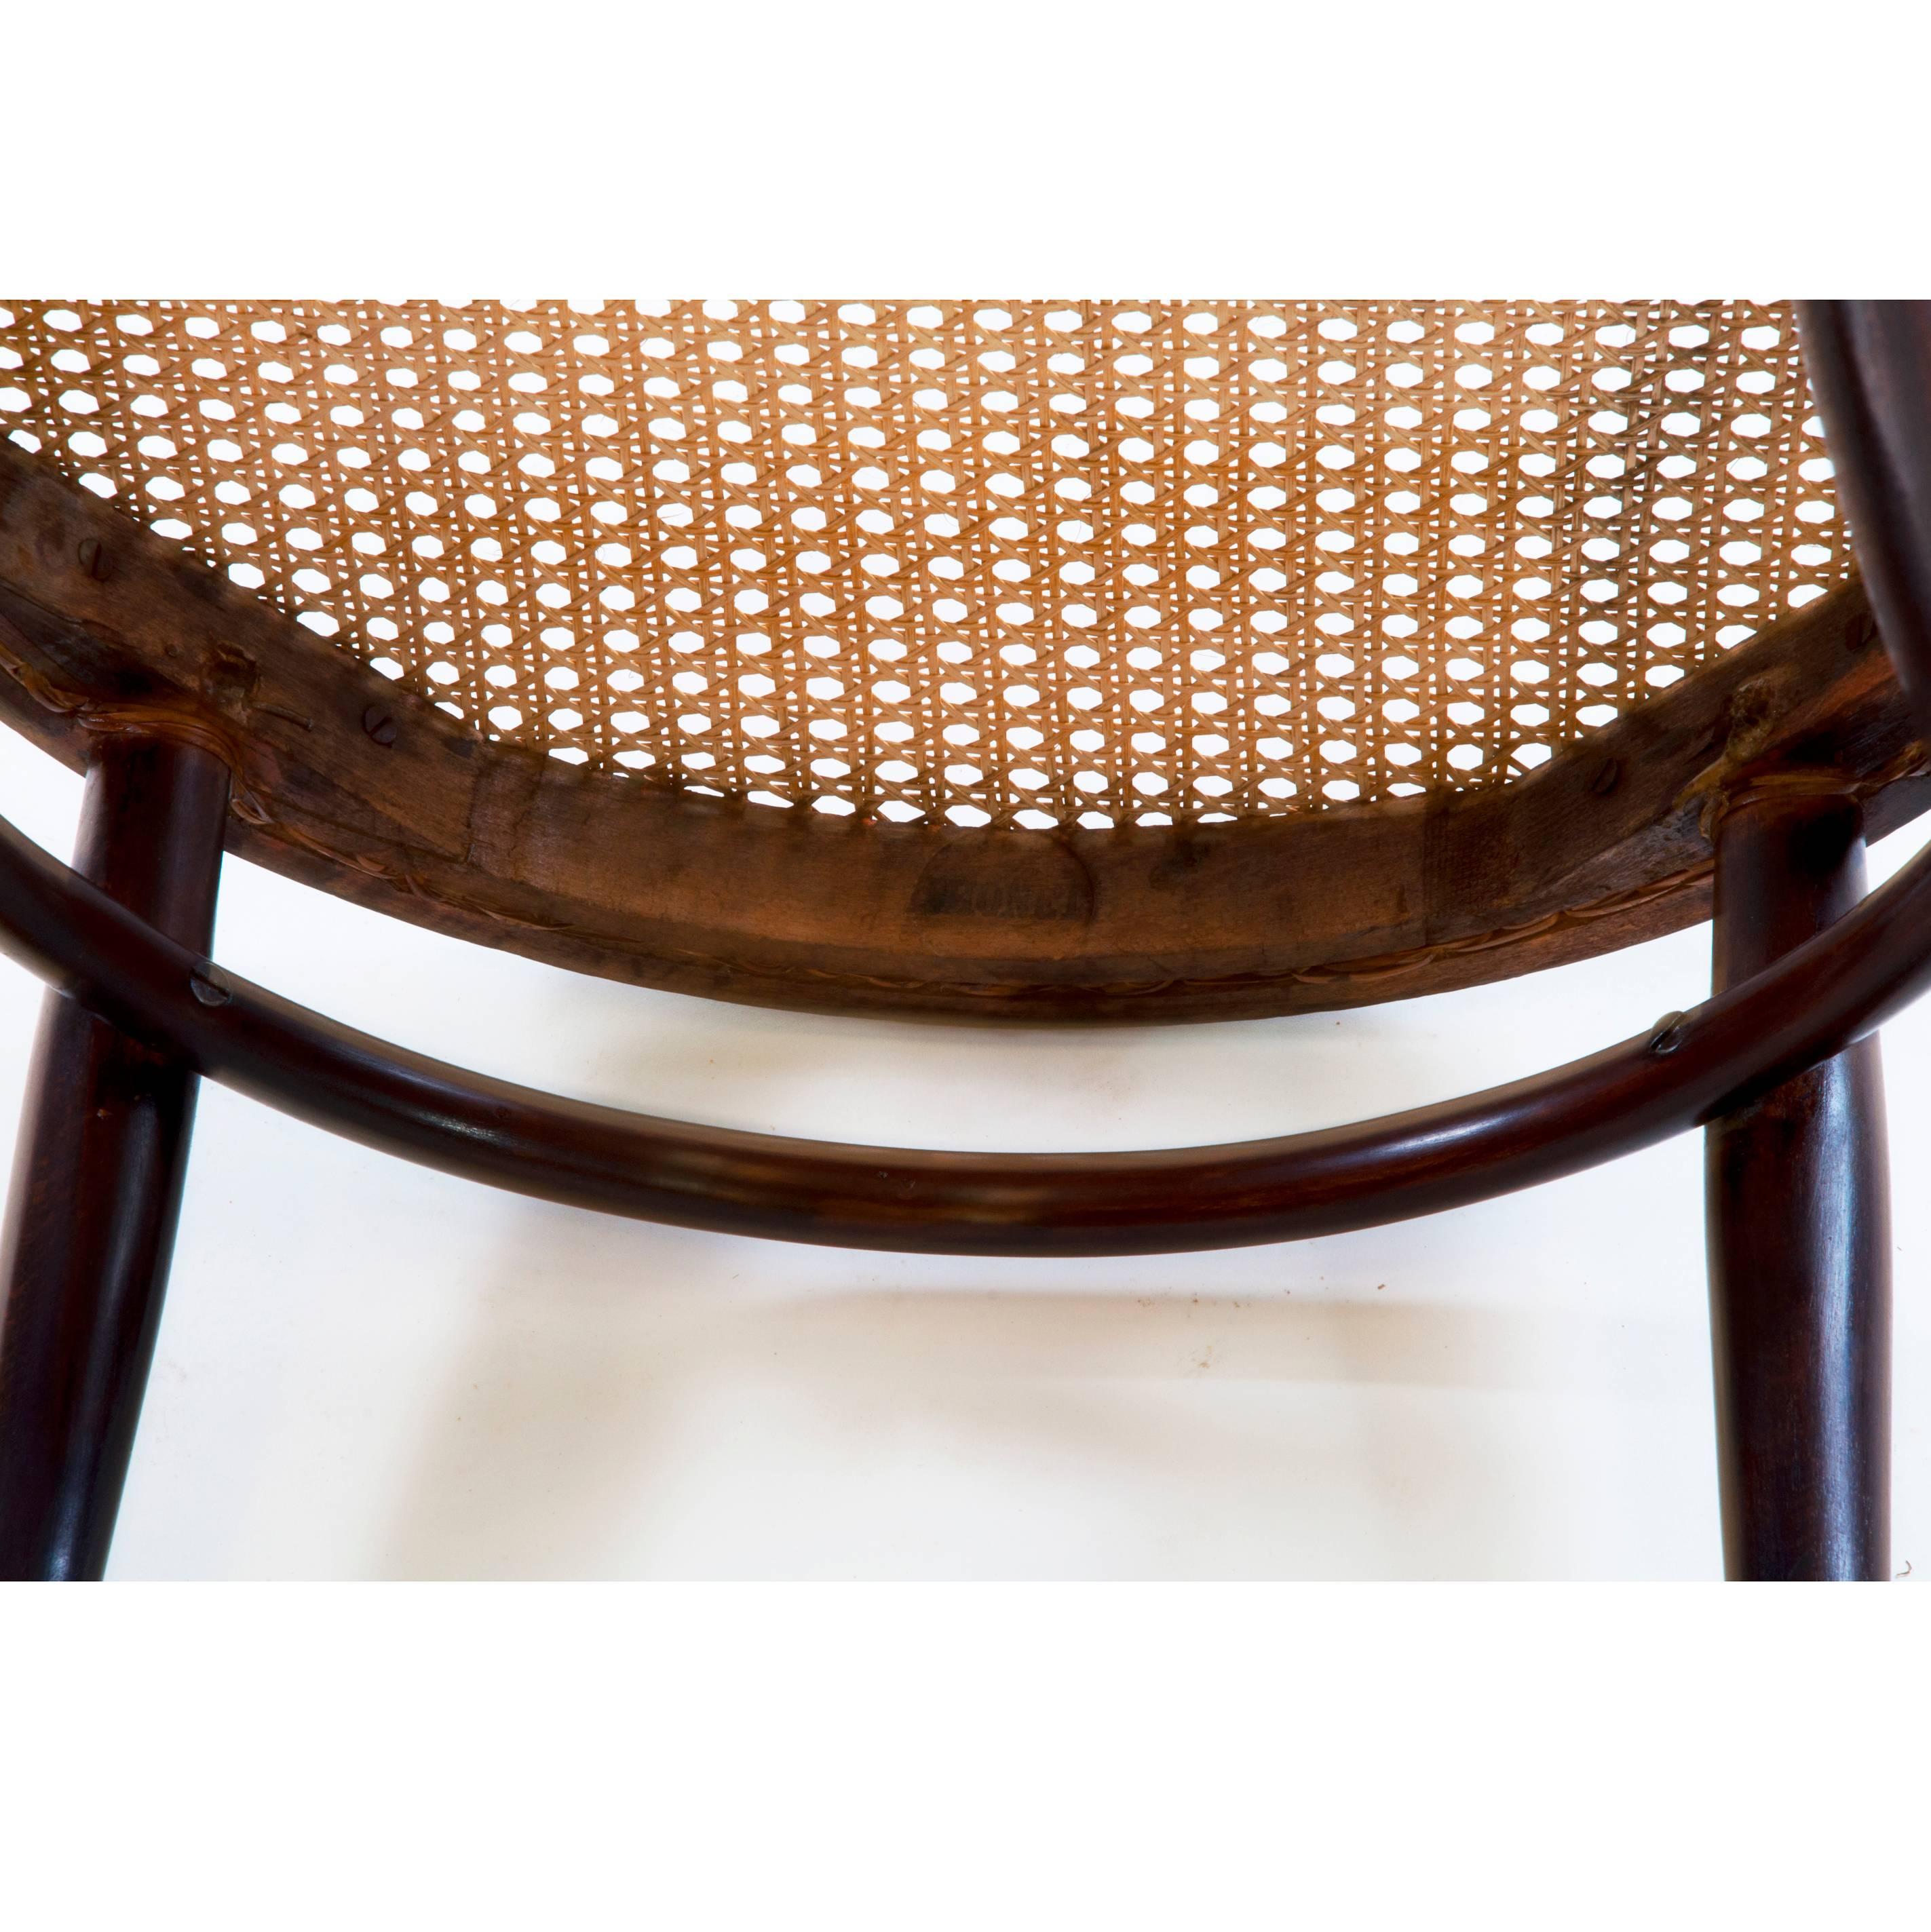 Wicker Antique Thonet Bentwood Armchair Fauteuil No. 11 For Sale